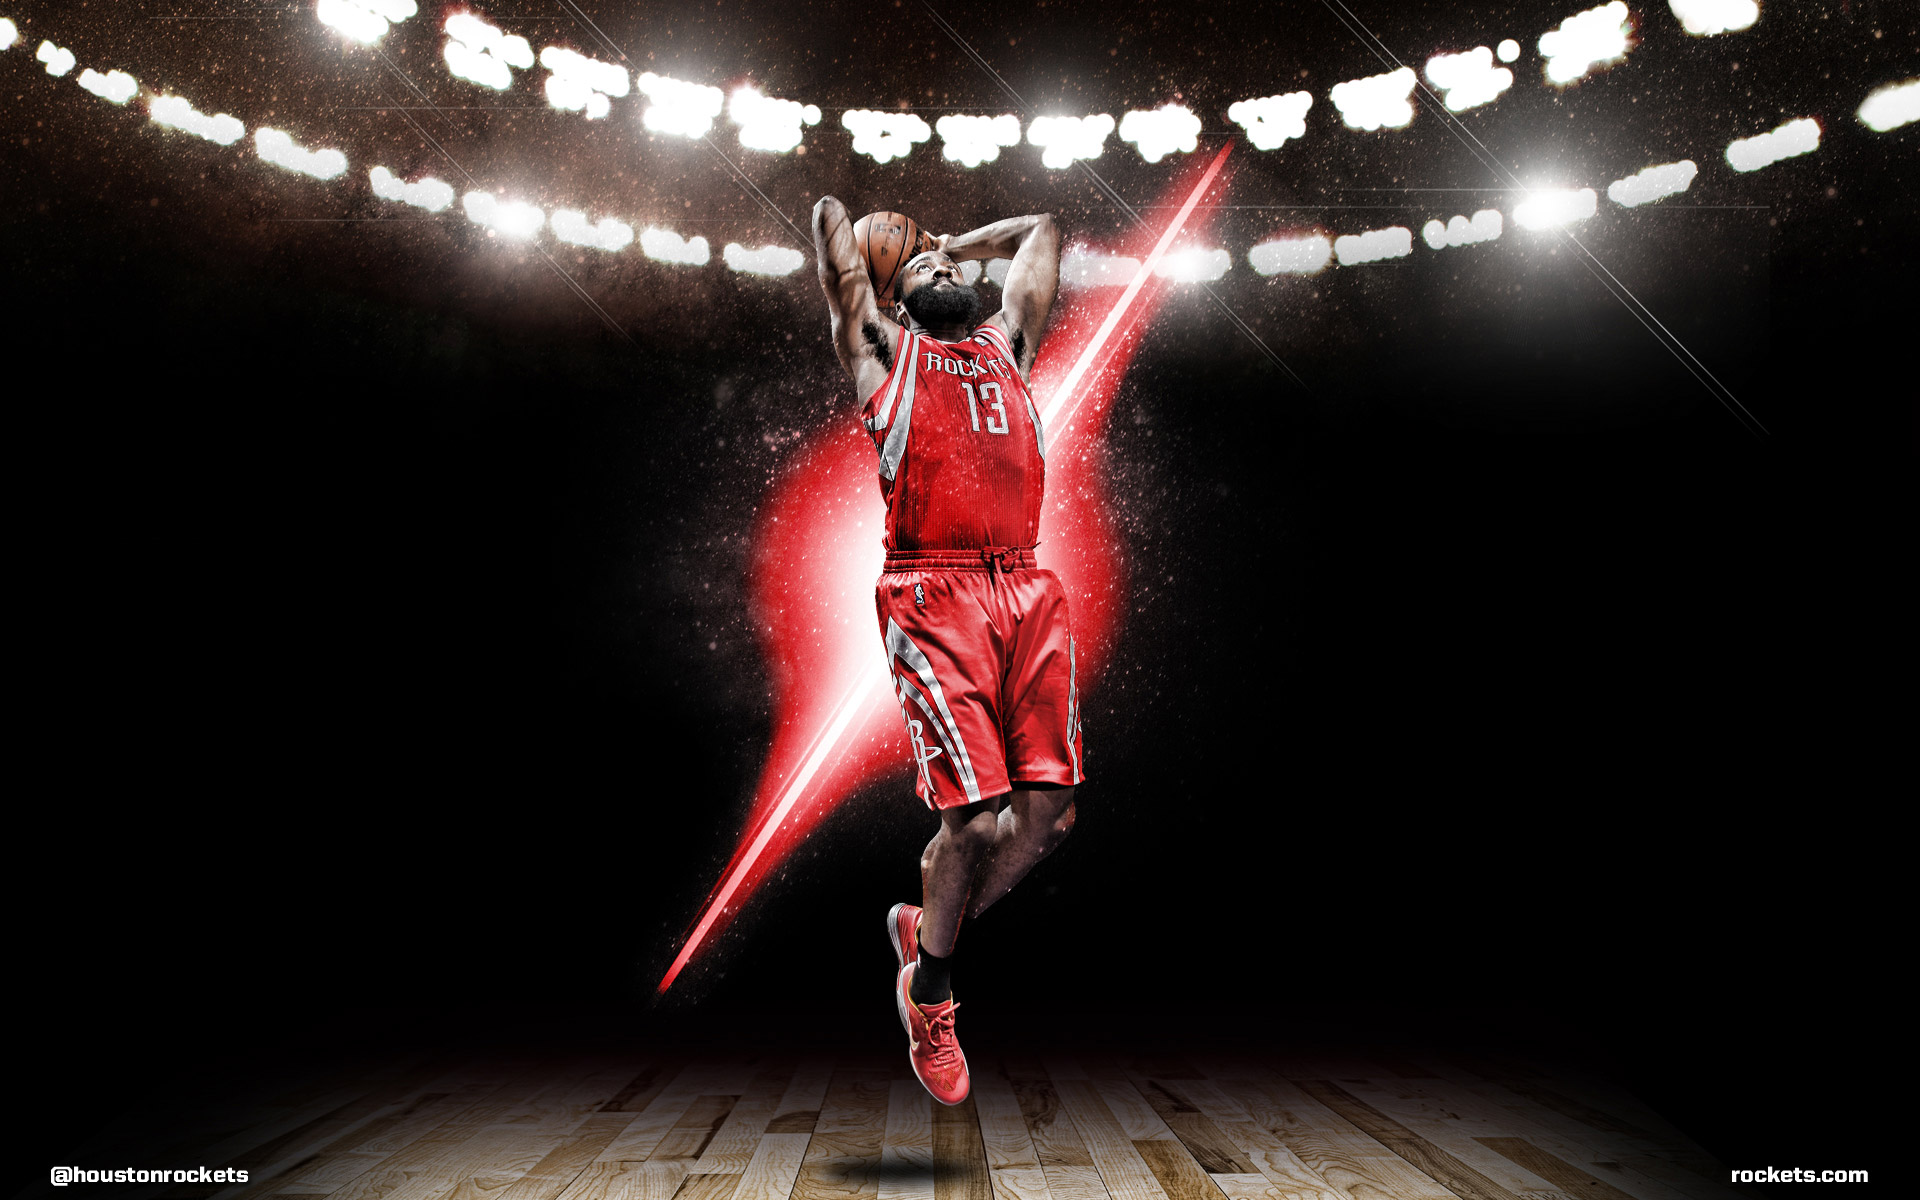 James Harden Wallpapers | Basketball Wallpapers at BasketWallpapers.com